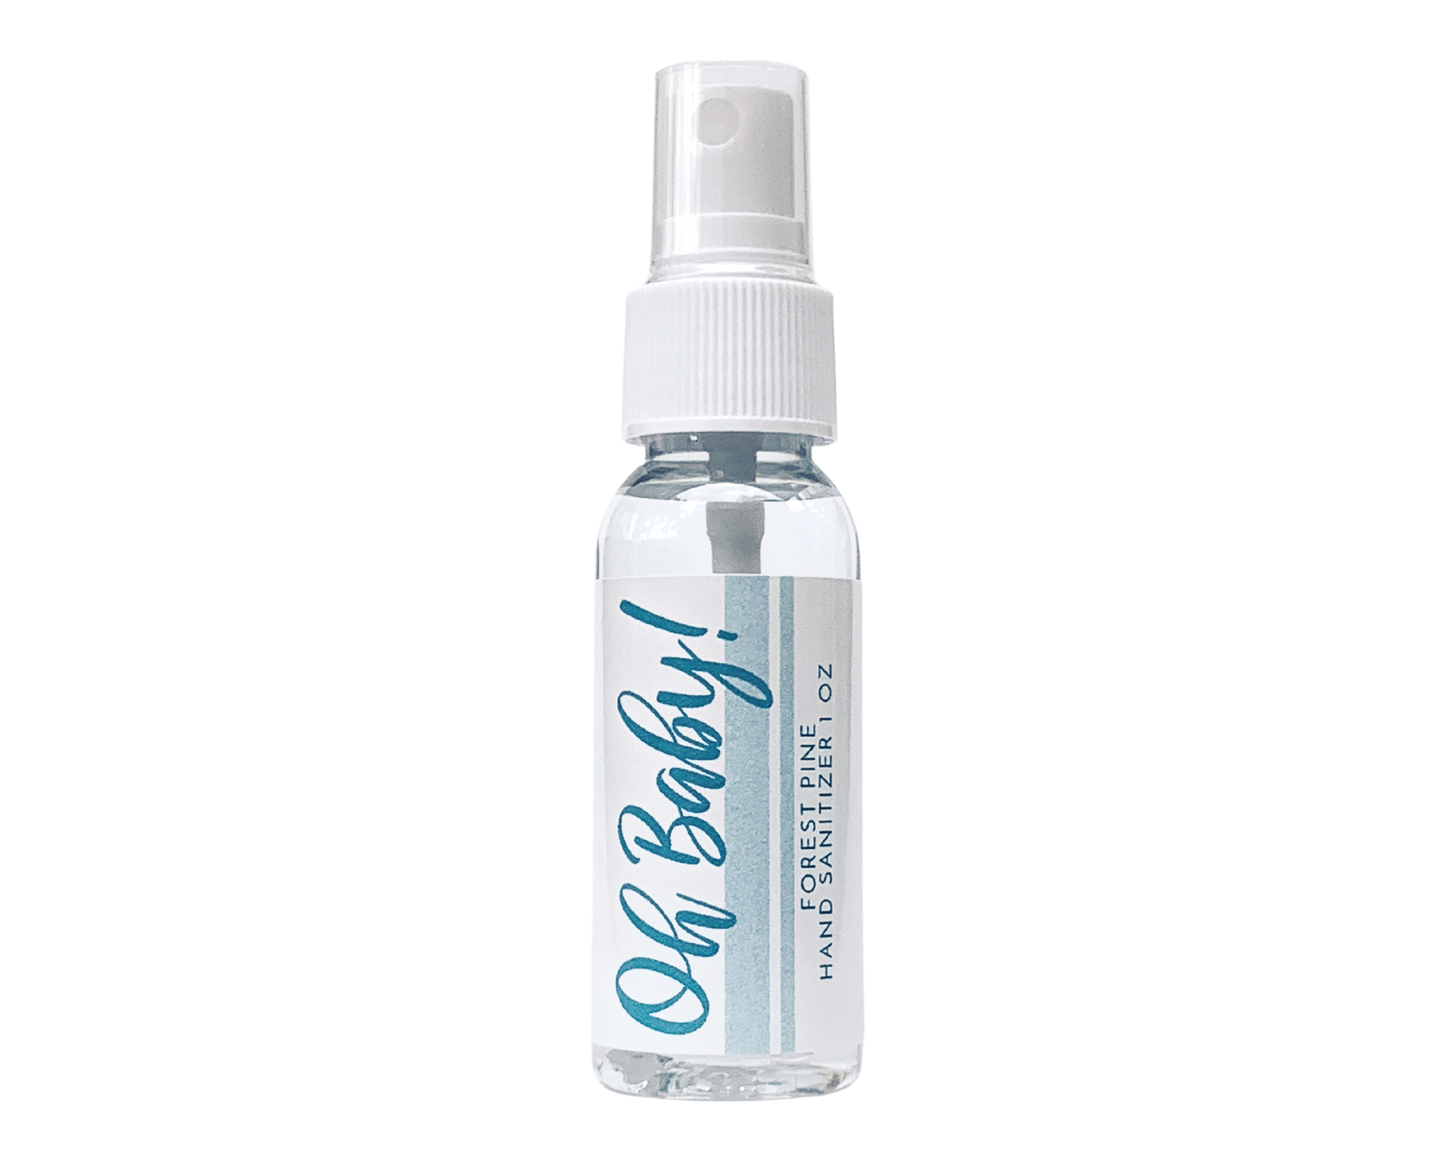 Hand Sanitizer Party Favor - Oh Baby! Blue - with Aloe & Essential Oils by Sunshine & Sanitizer